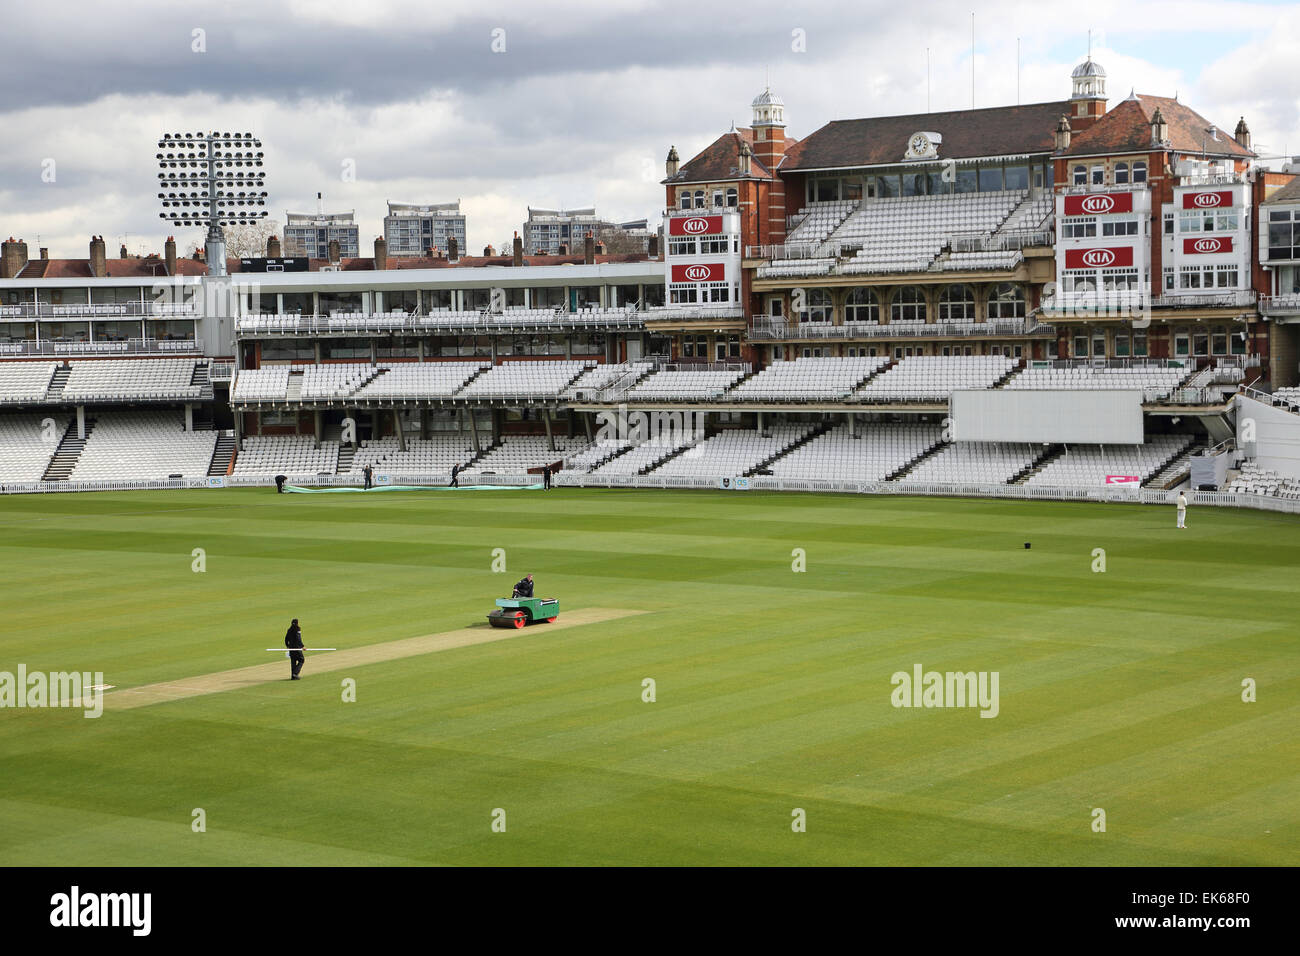 Ground staff maintain the pitch in front of the main grandstand at the Oval Cricket Ground, home of Surrey County Cricket Club Stock Photo